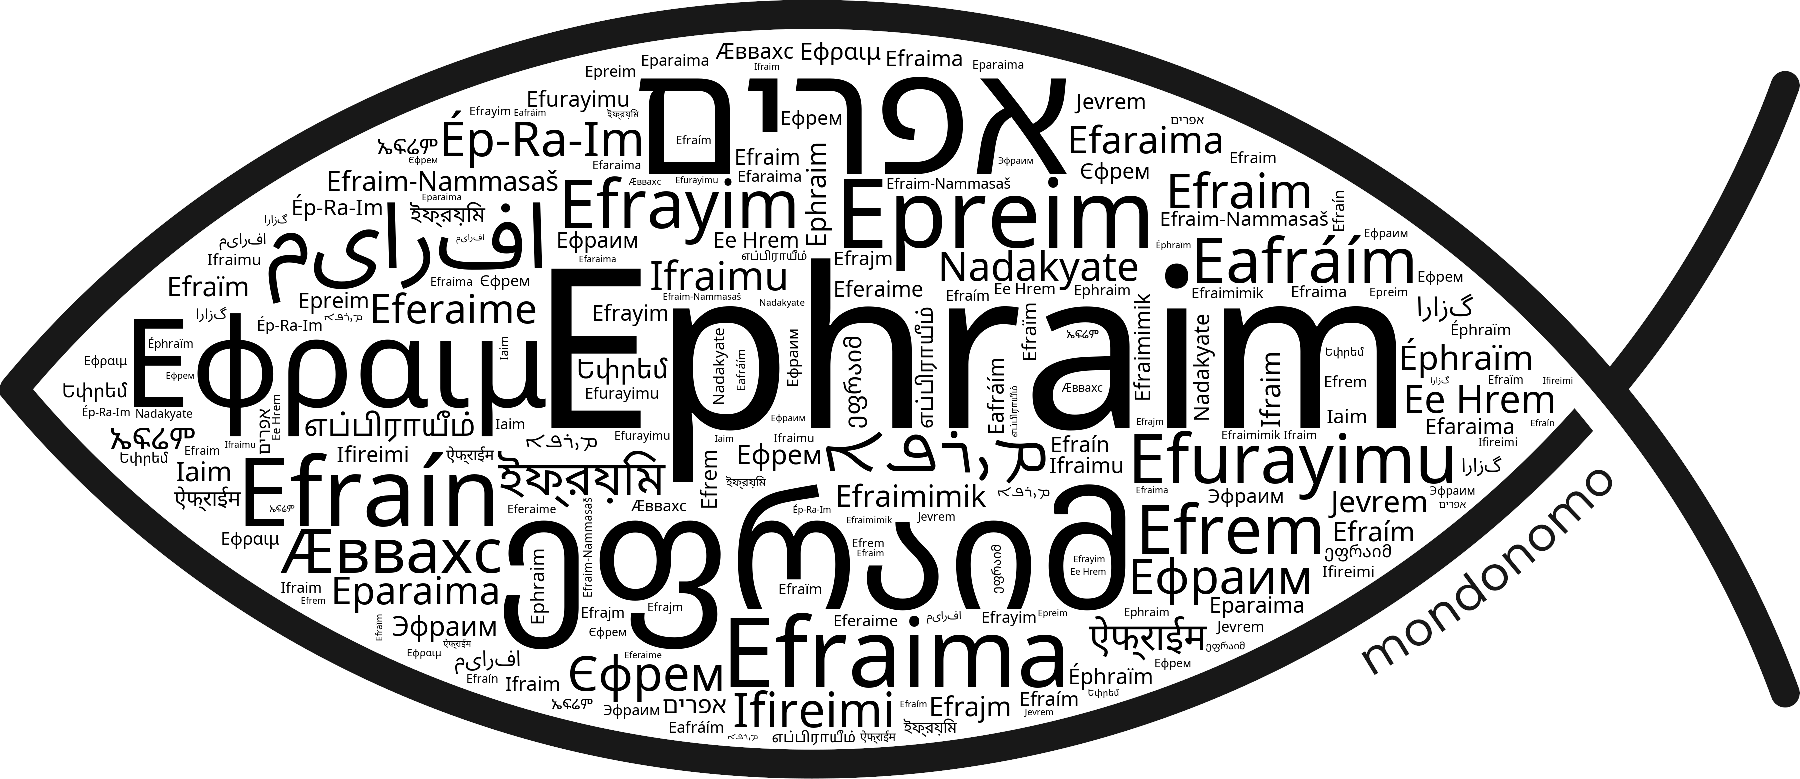 Name Ephraim in the world's Bibles